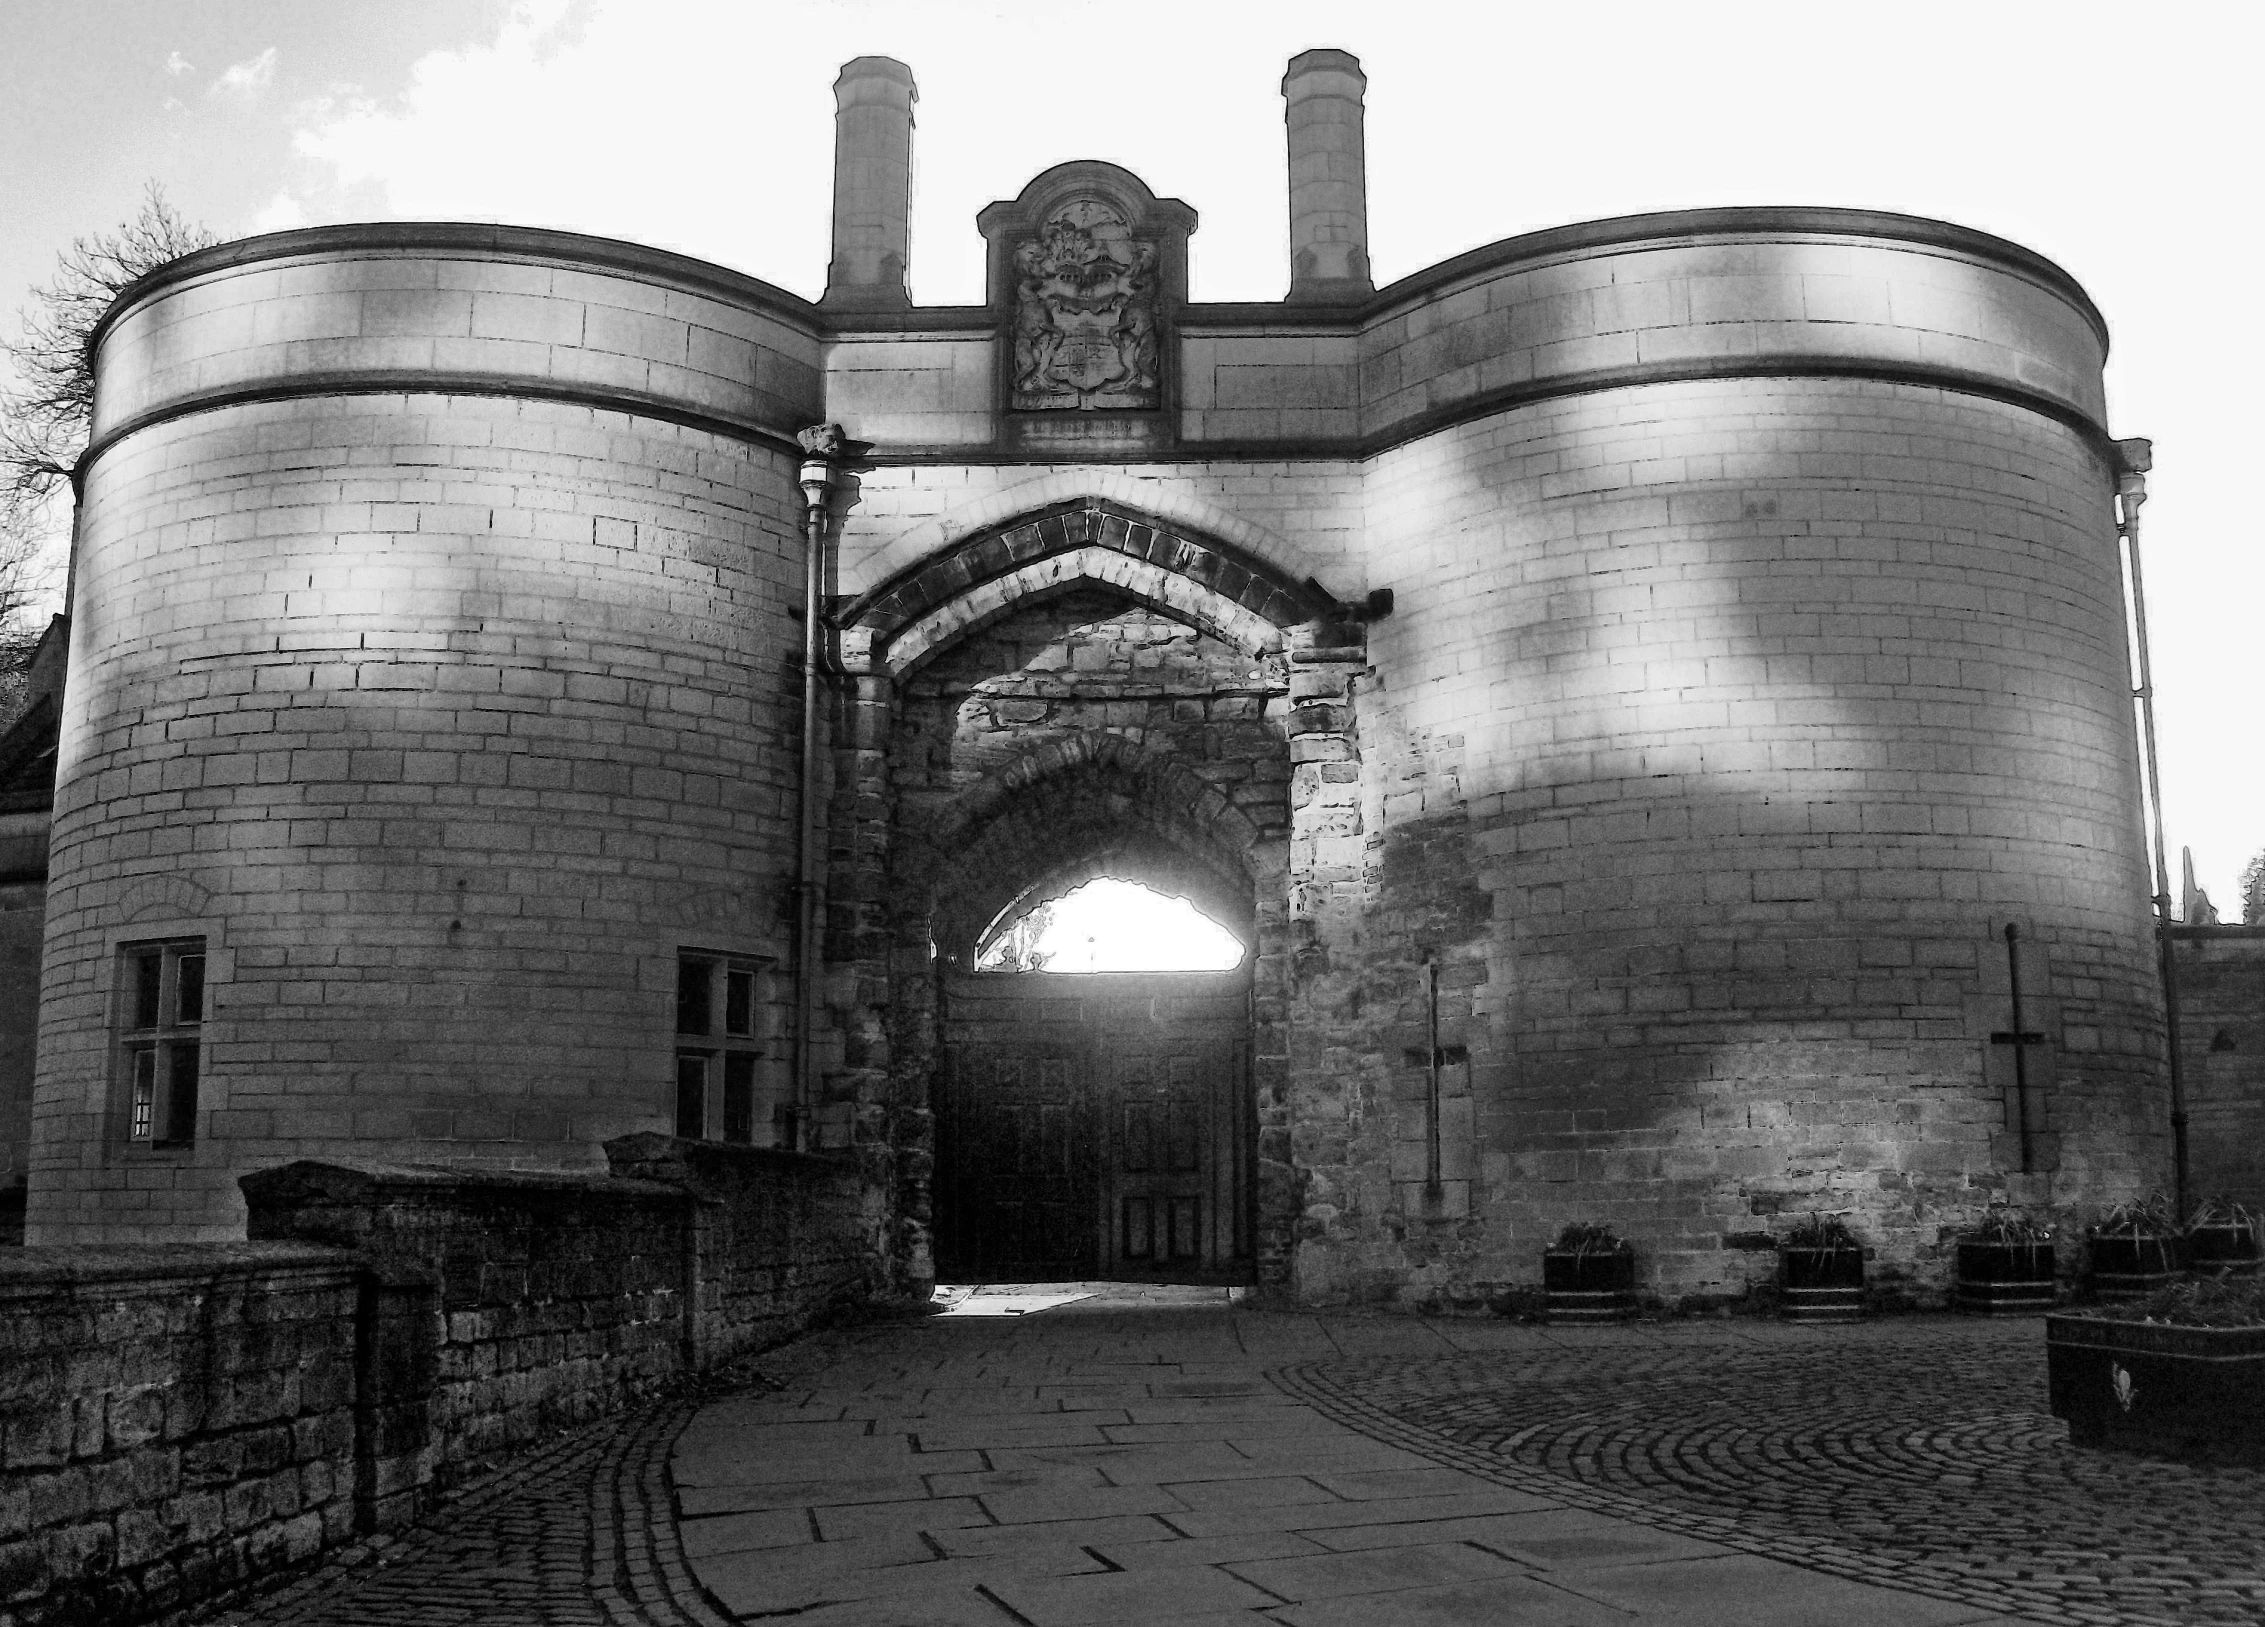 a brick castle with an arched entrance and a wall